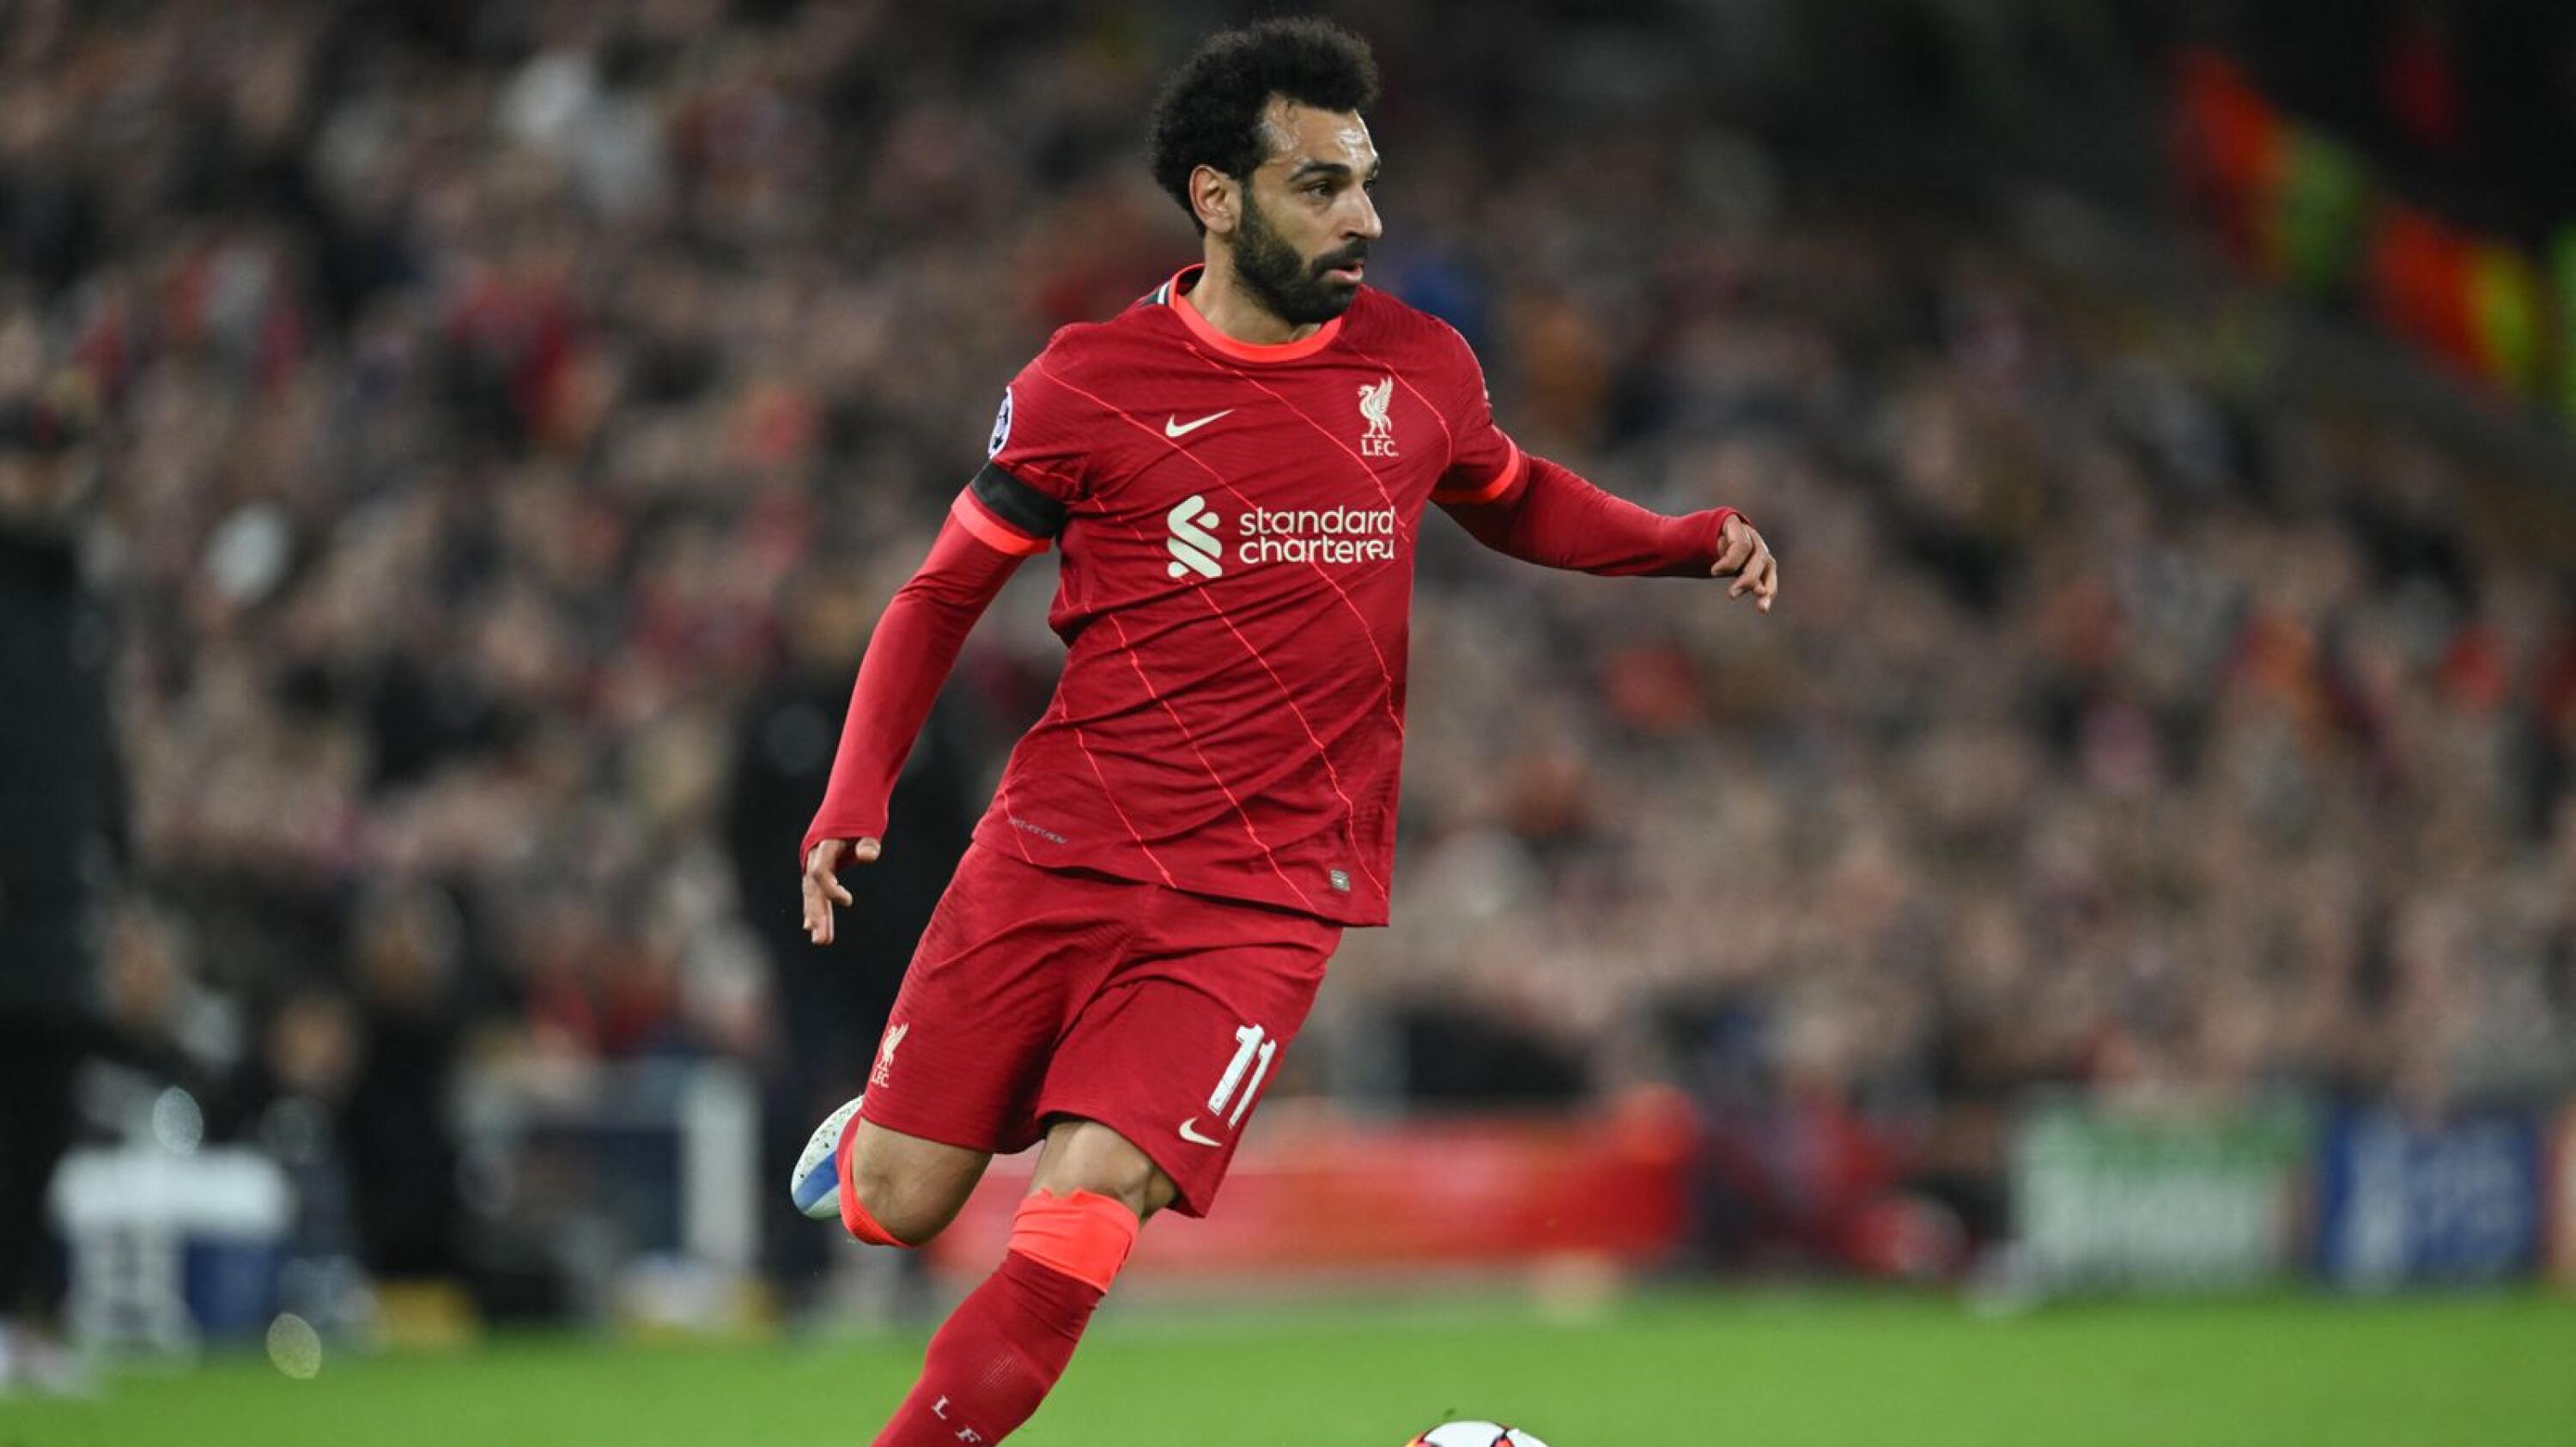 Liverpool's Egyptian midfielder Mohamed Salah controls the ball during the UEFA Champions League quarter final second leg football match between Liverpool and Benfica at the Anfield stadium, in Liverpool